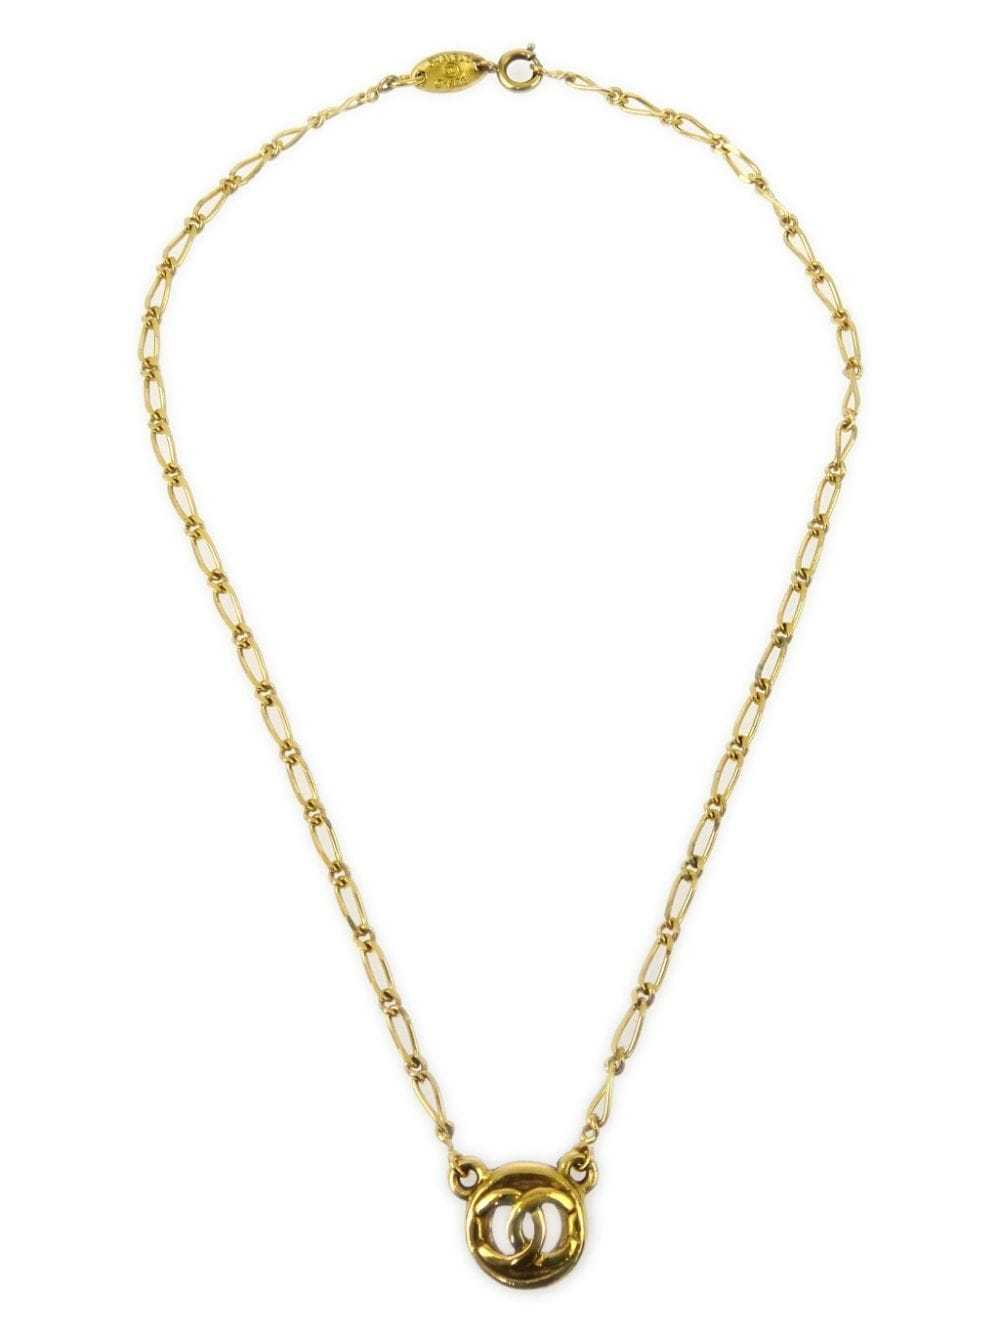 CHANEL Pre-Owned 1982 CC medallion necklace - Gold - image 1